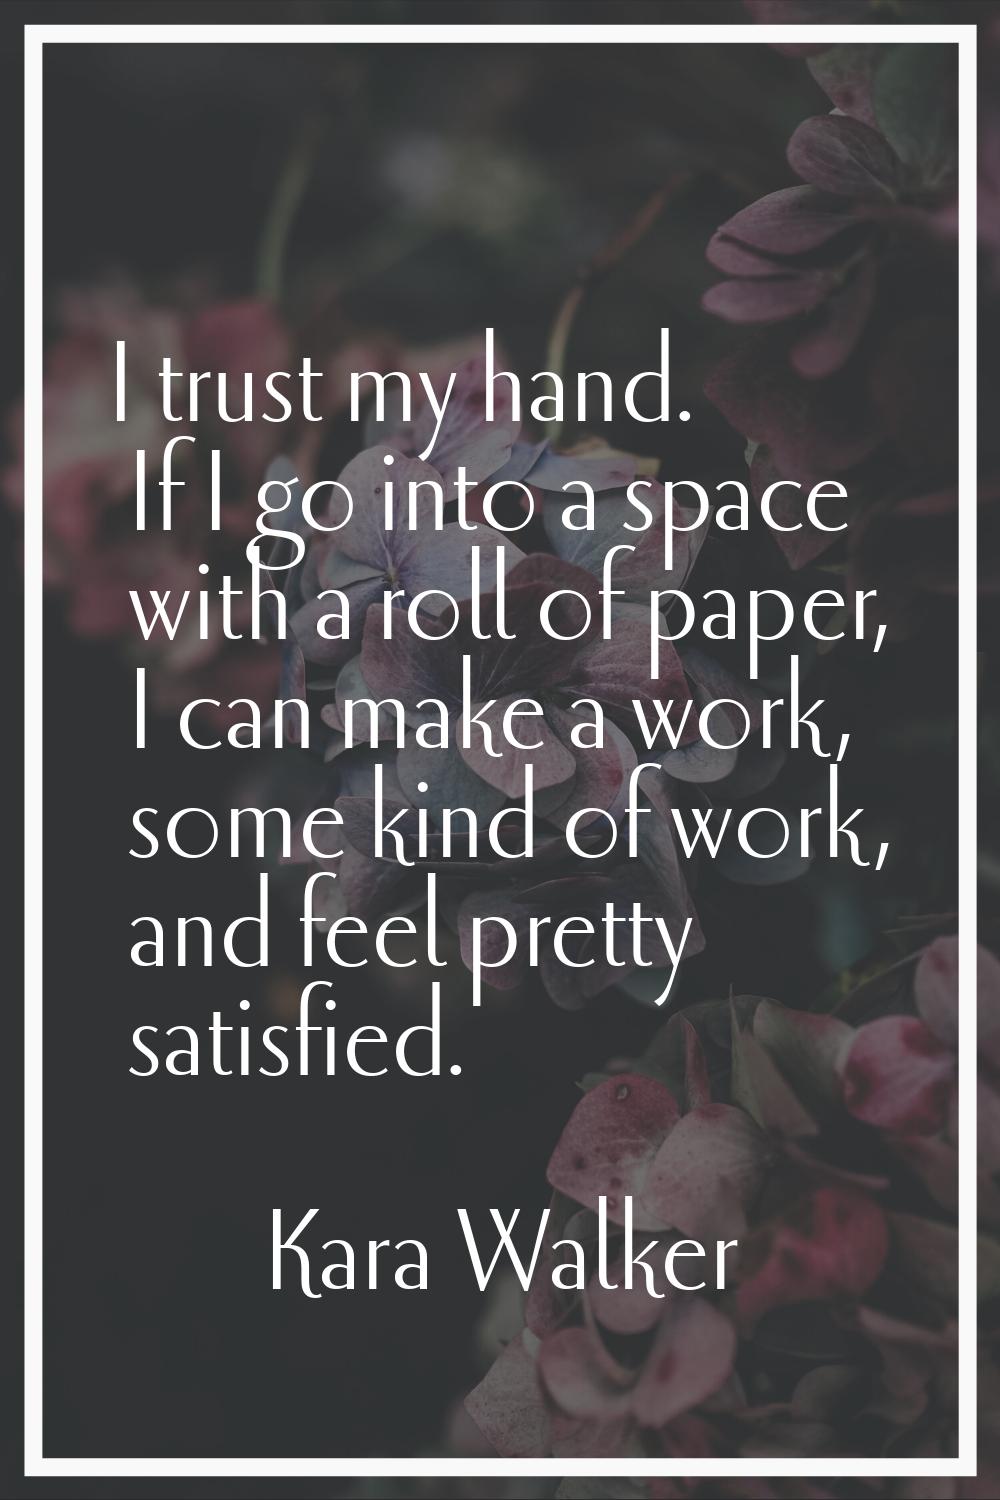 I trust my hand. If I go into a space with a roll of paper, I can make a work, some kind of work, a